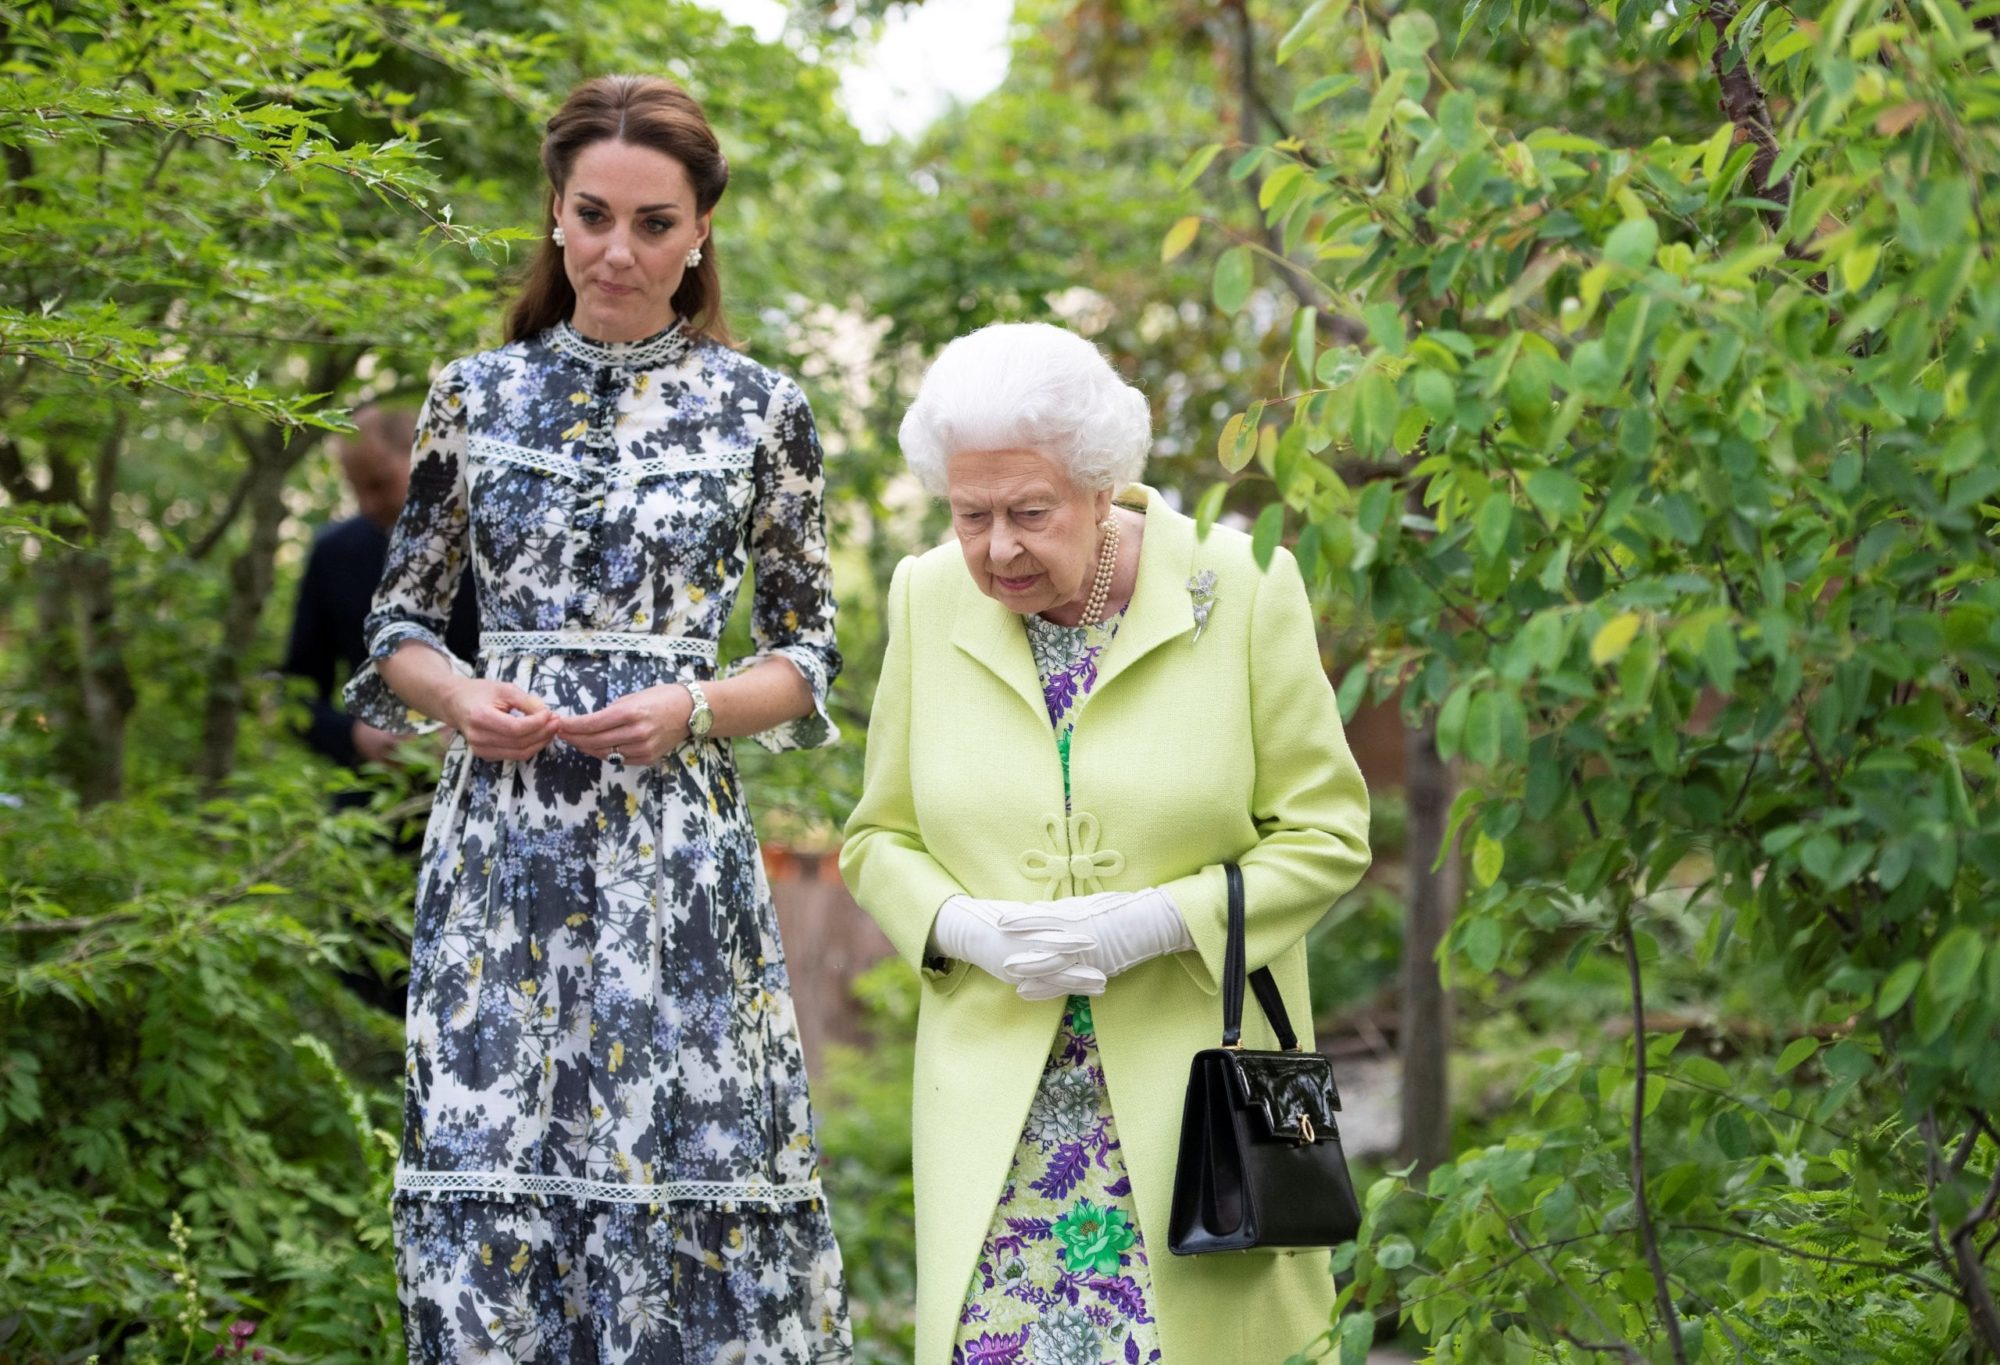 Britain's Queen Elizabeth II is shown around 'Back to Nature' by the designer, Catherine Duchess of Cambridge at the Chelsea Flower Show in London, Britain May 20, 2019. Geoff Pugh/Pool via REUTERS - RC14E7254F60